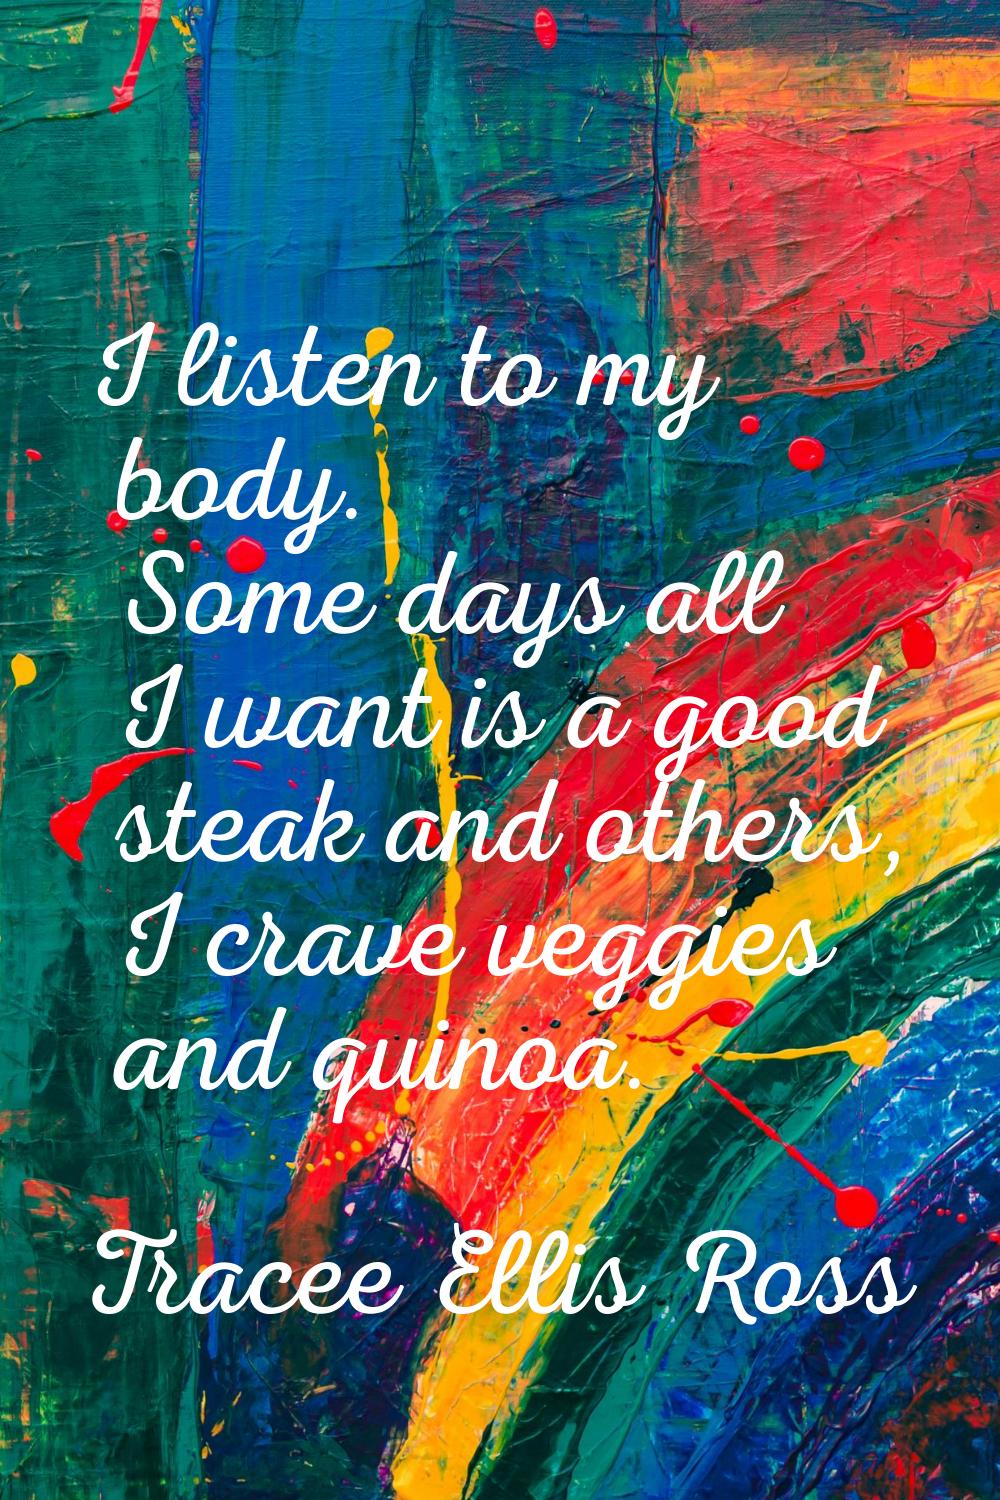 I listen to my body. Some days all I want is a good steak and others, I crave veggies and quinoa.